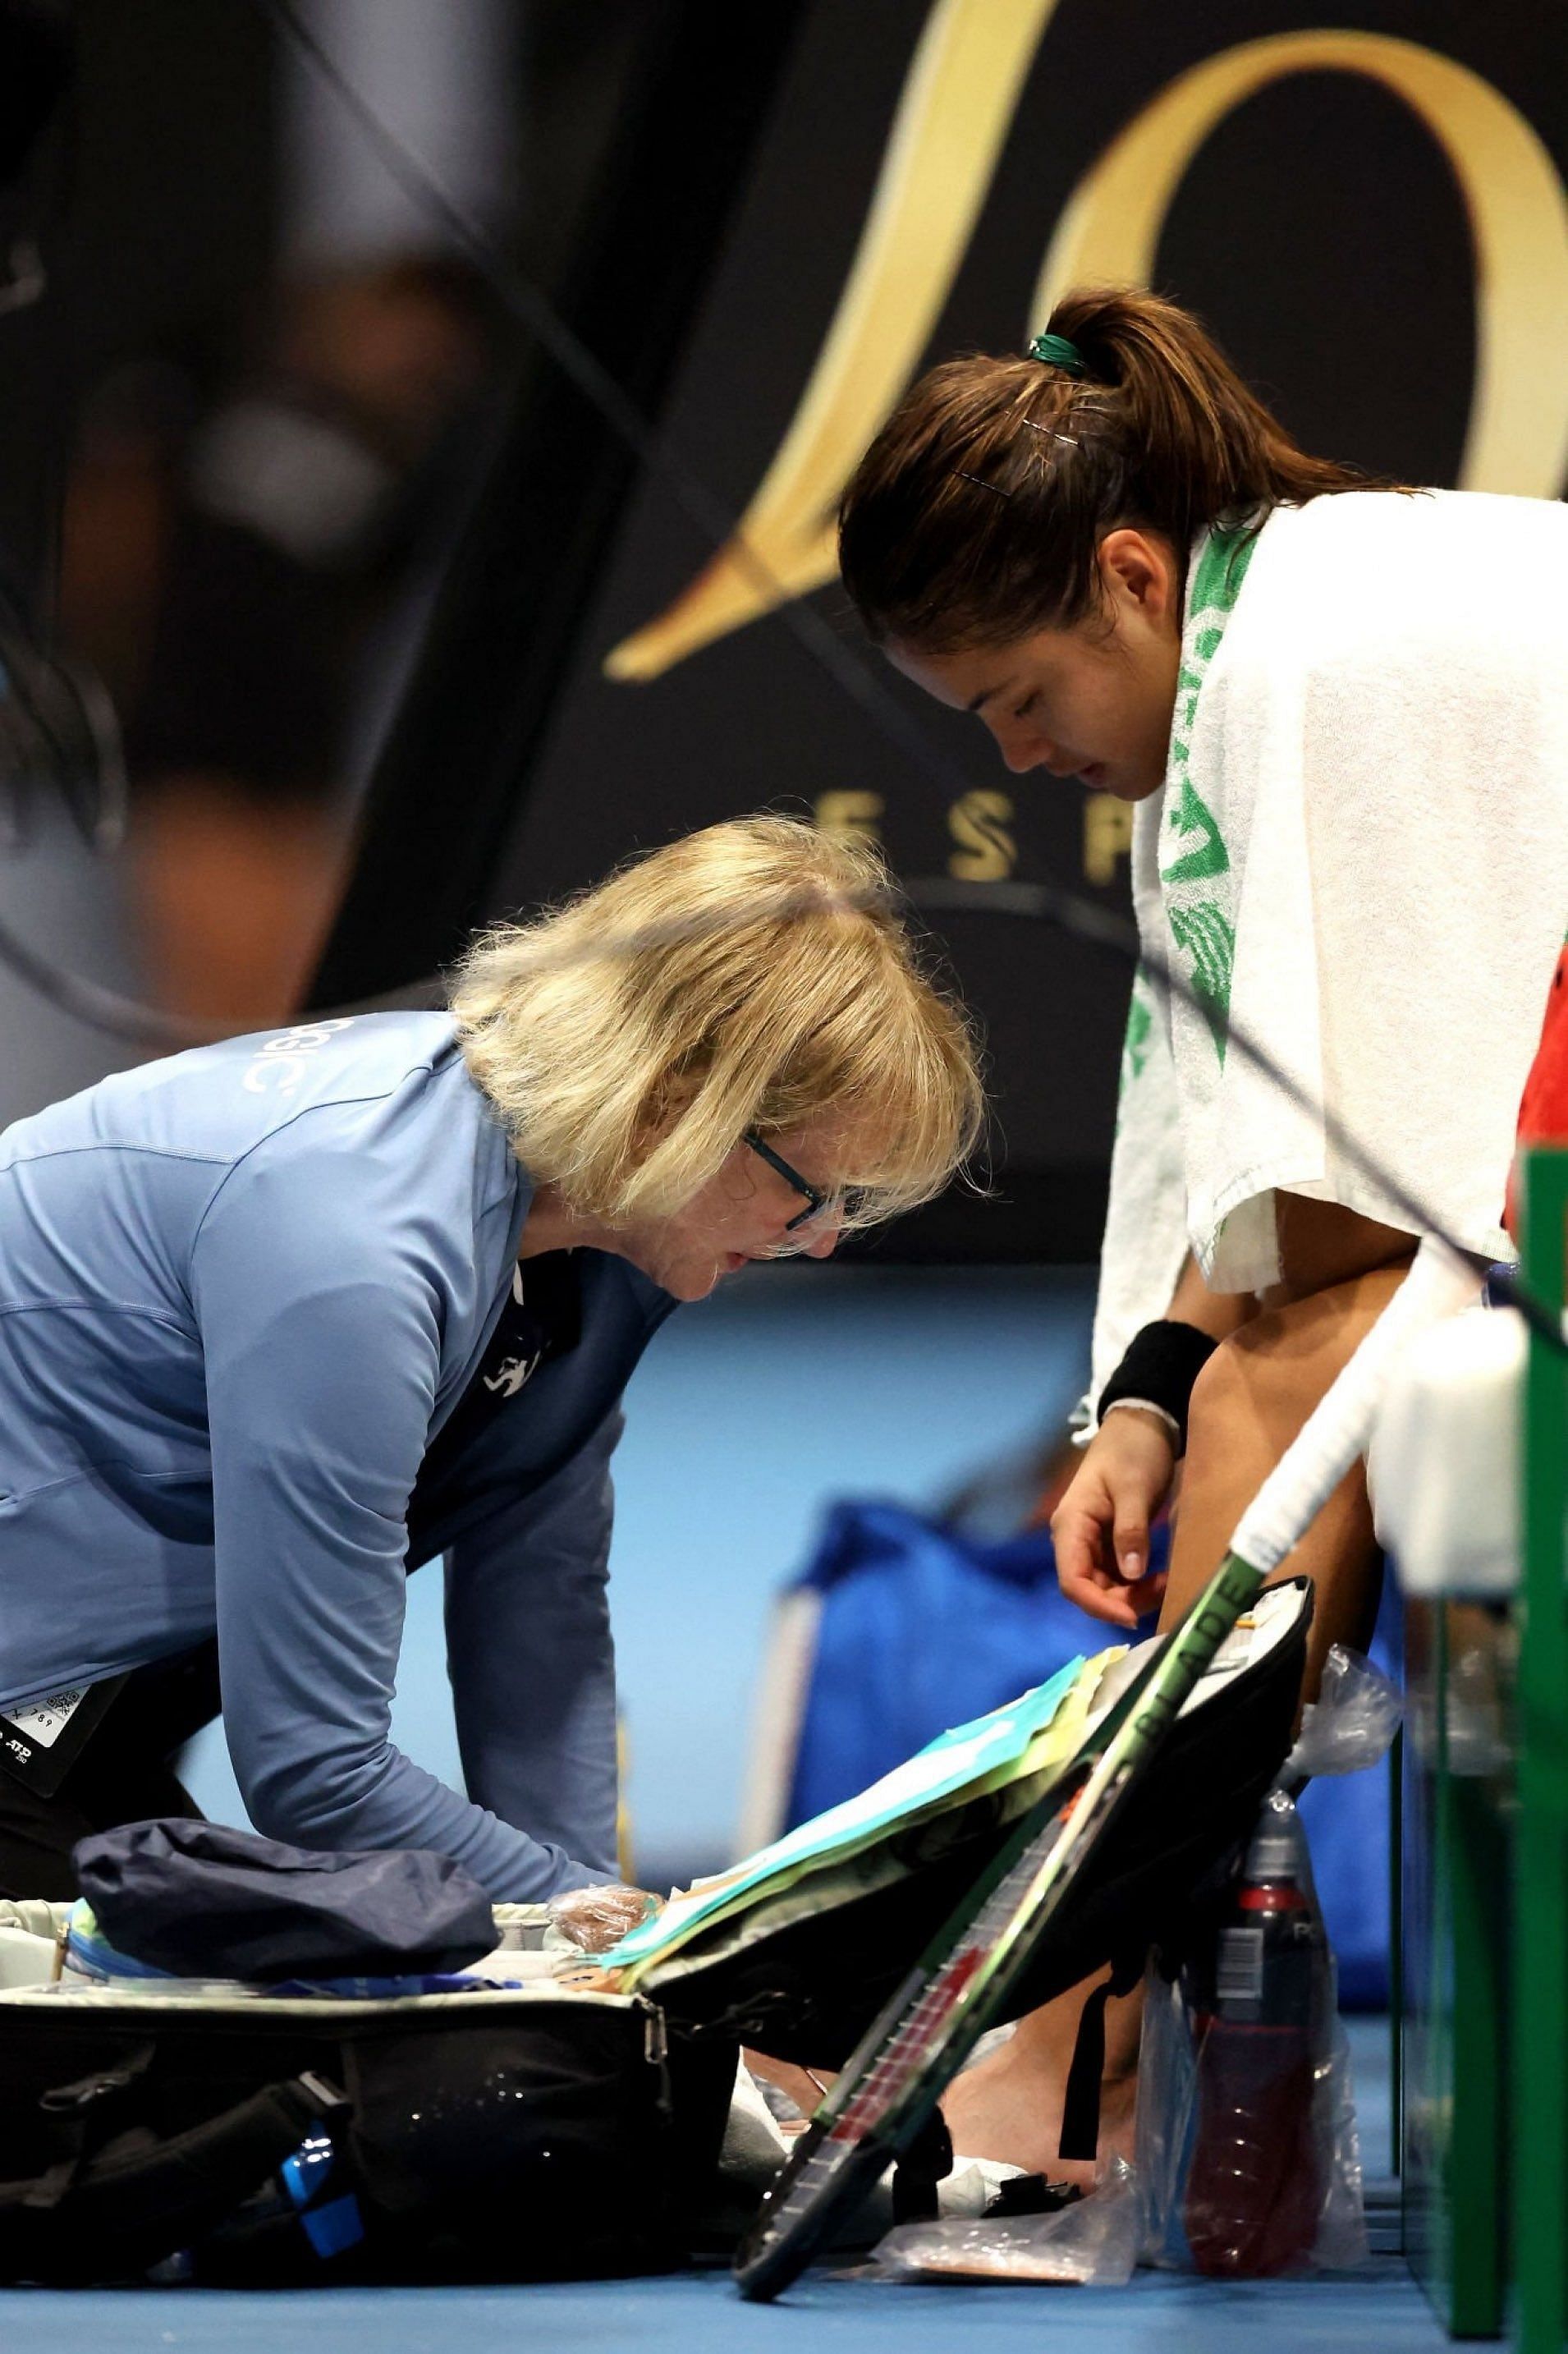 Raducanu underwent treatment on her knew before withdrawing from her match